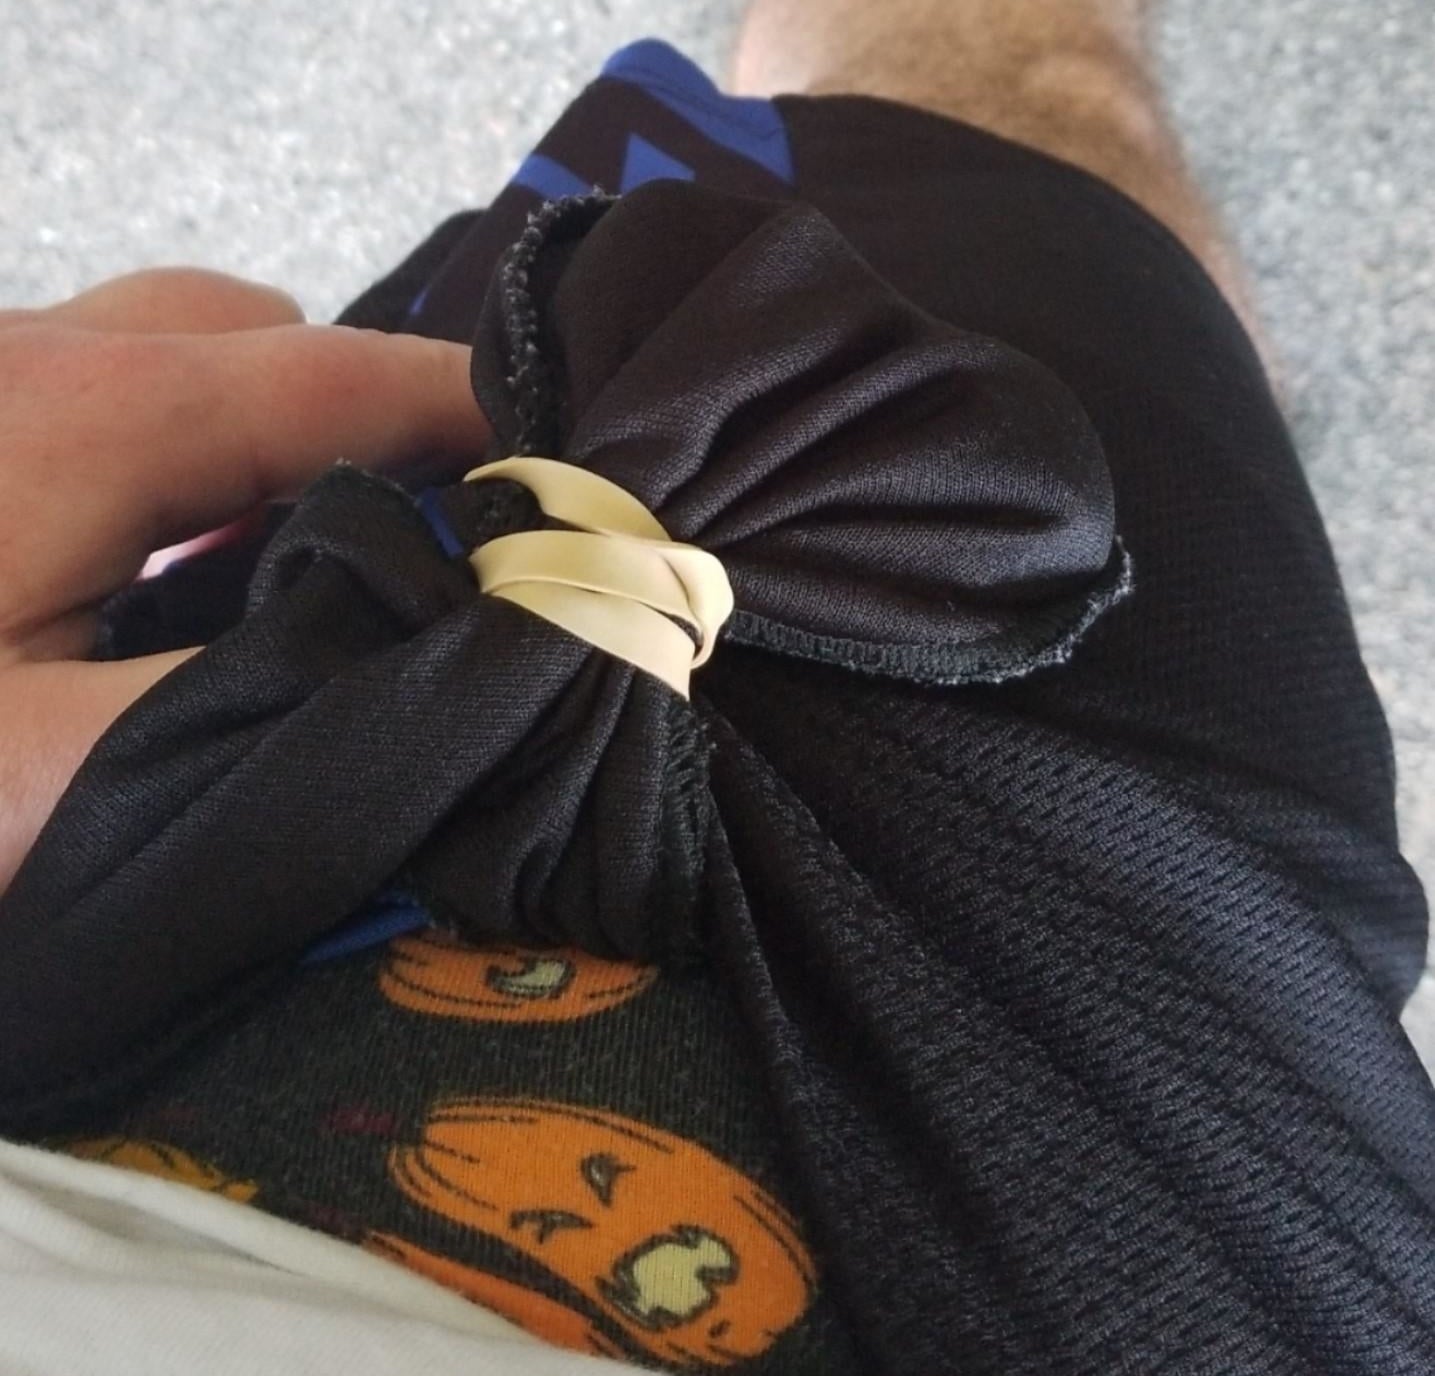 A rubber band on someone&#x27;s pocket